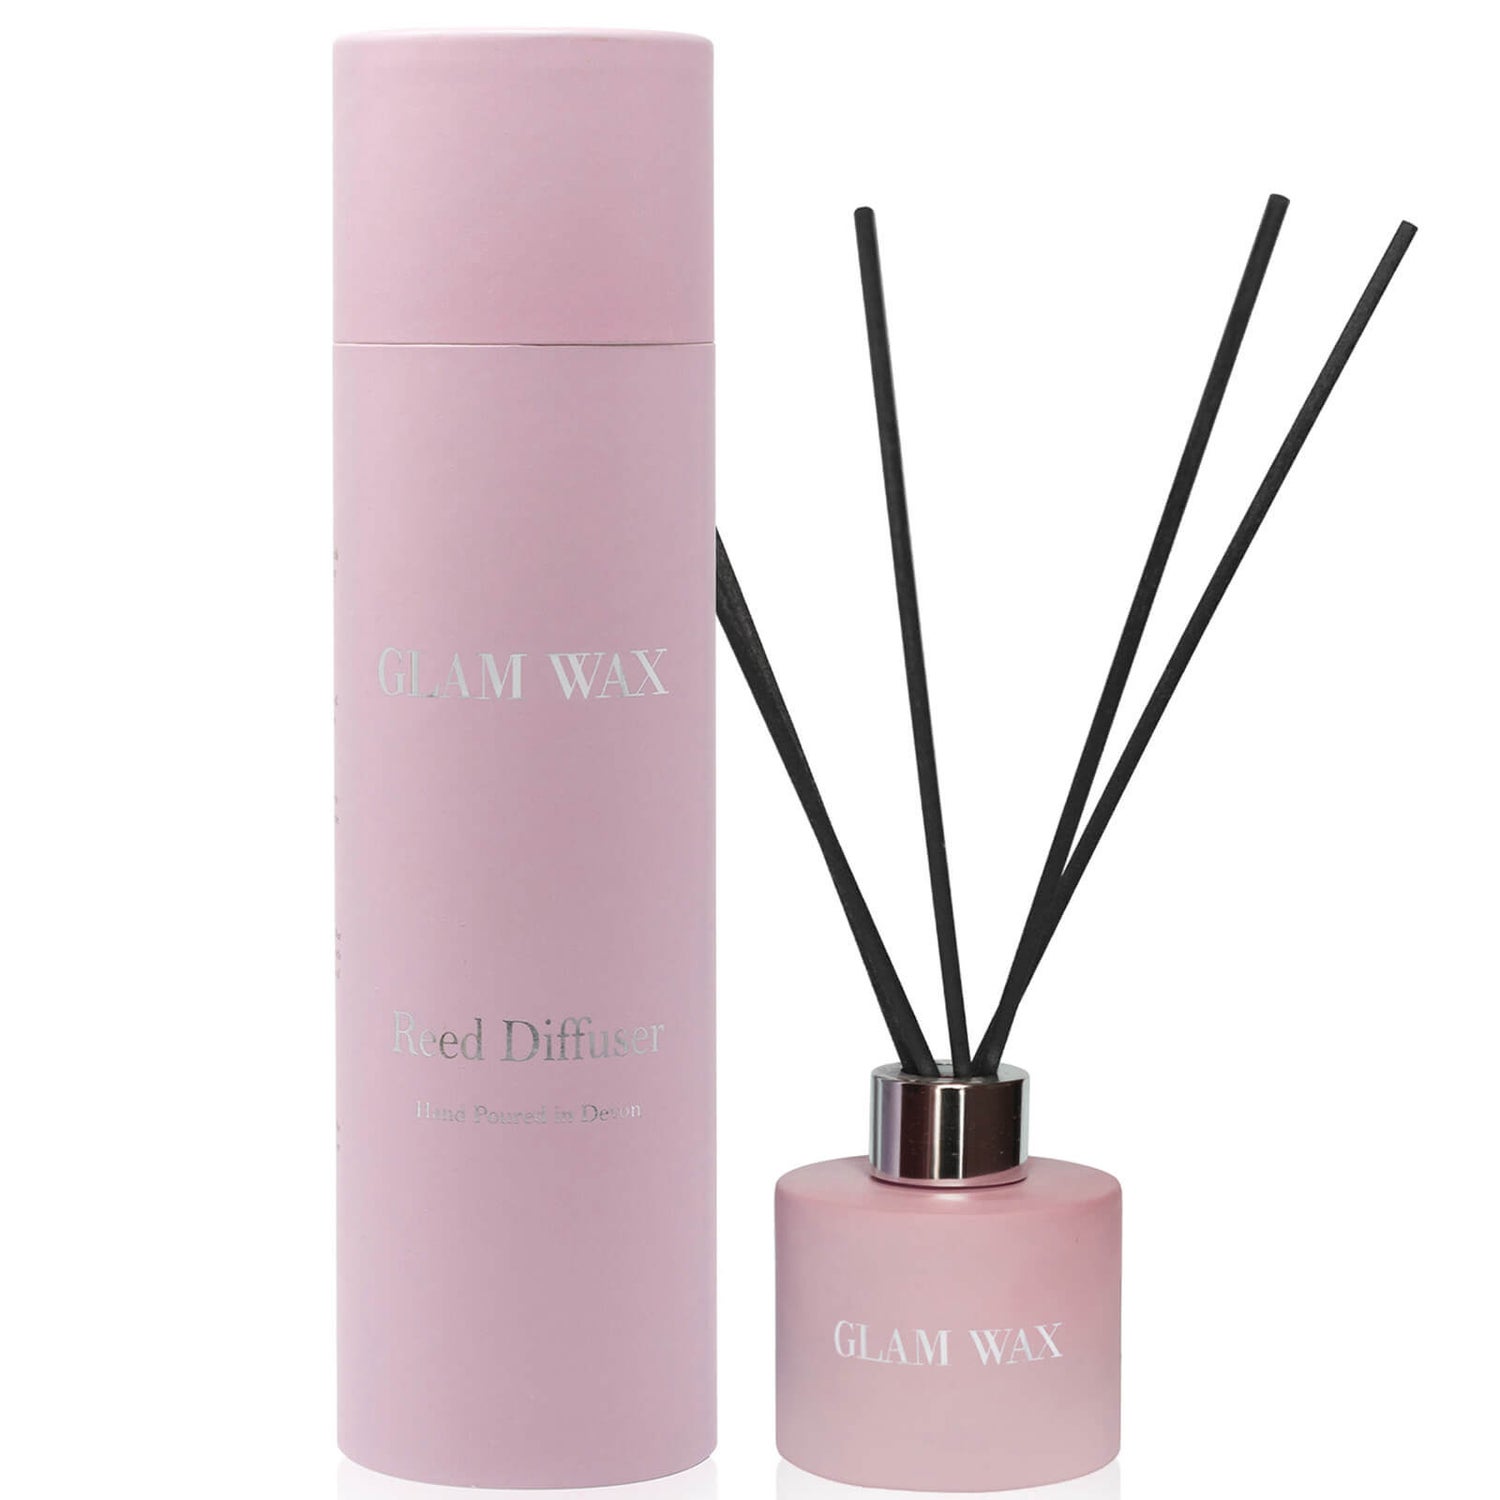 Glam Wax Velvet Rose and Oud Diffuser 100ml